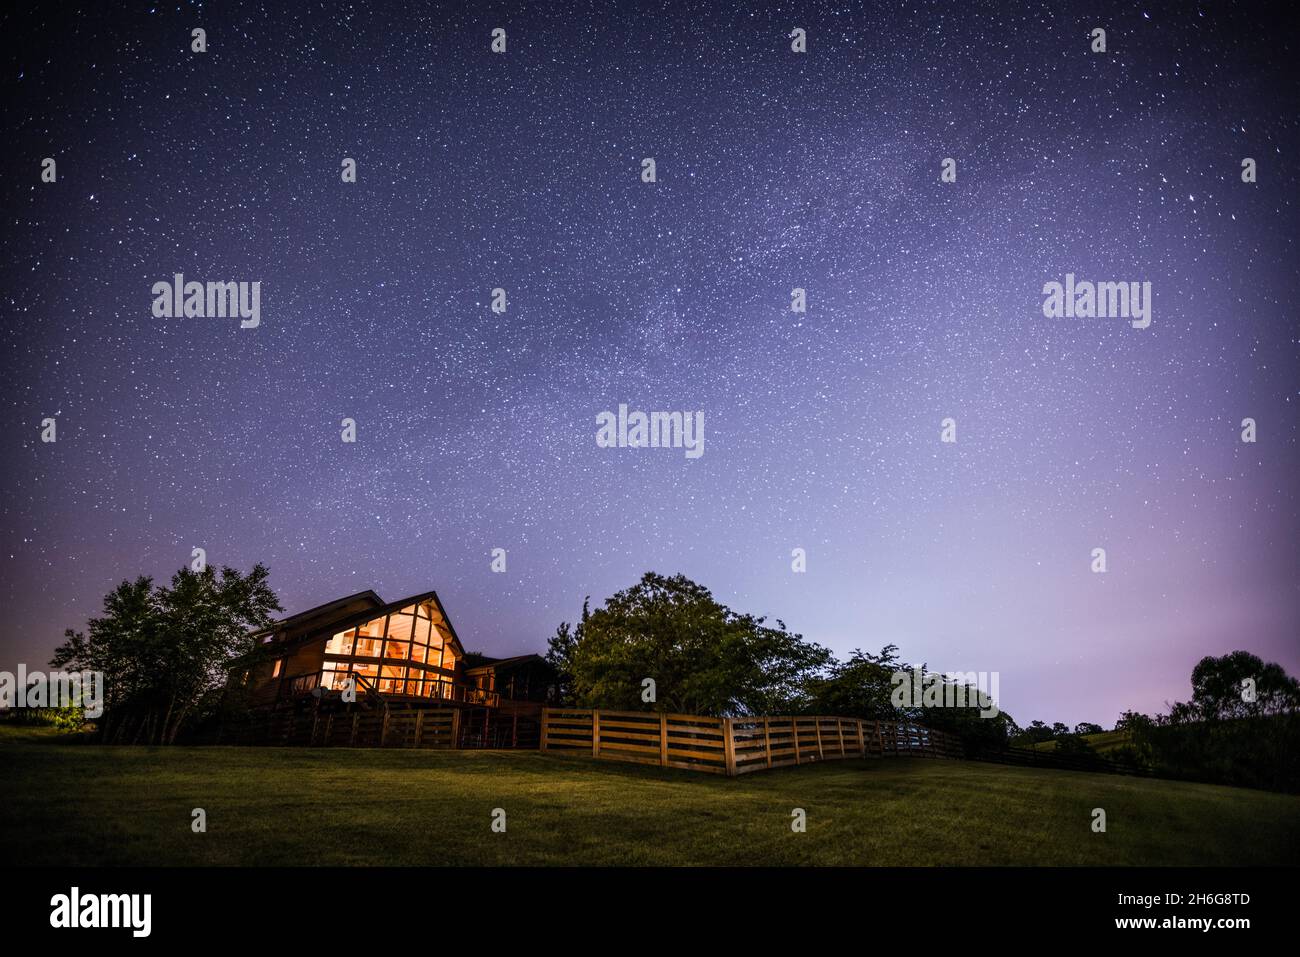 View of night sky and the Milky Way with a house in rural Kentucky in the foreground Stock Photo